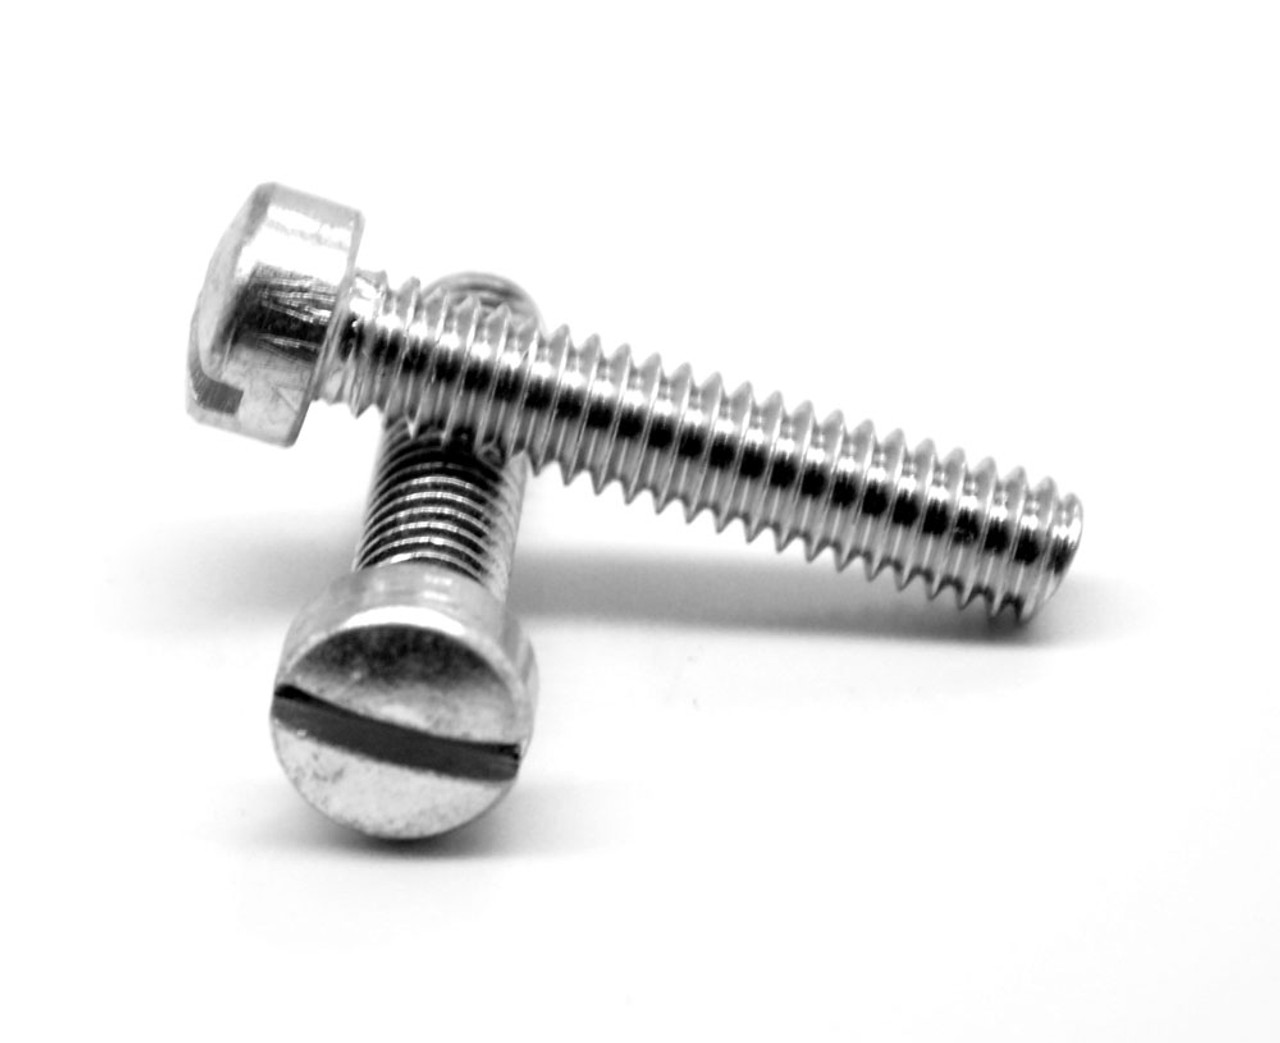 #12-24 x 7/8" (FT) Coarse Thread Machine Screw Slotted Fillister Head Stainless Steel 18-8